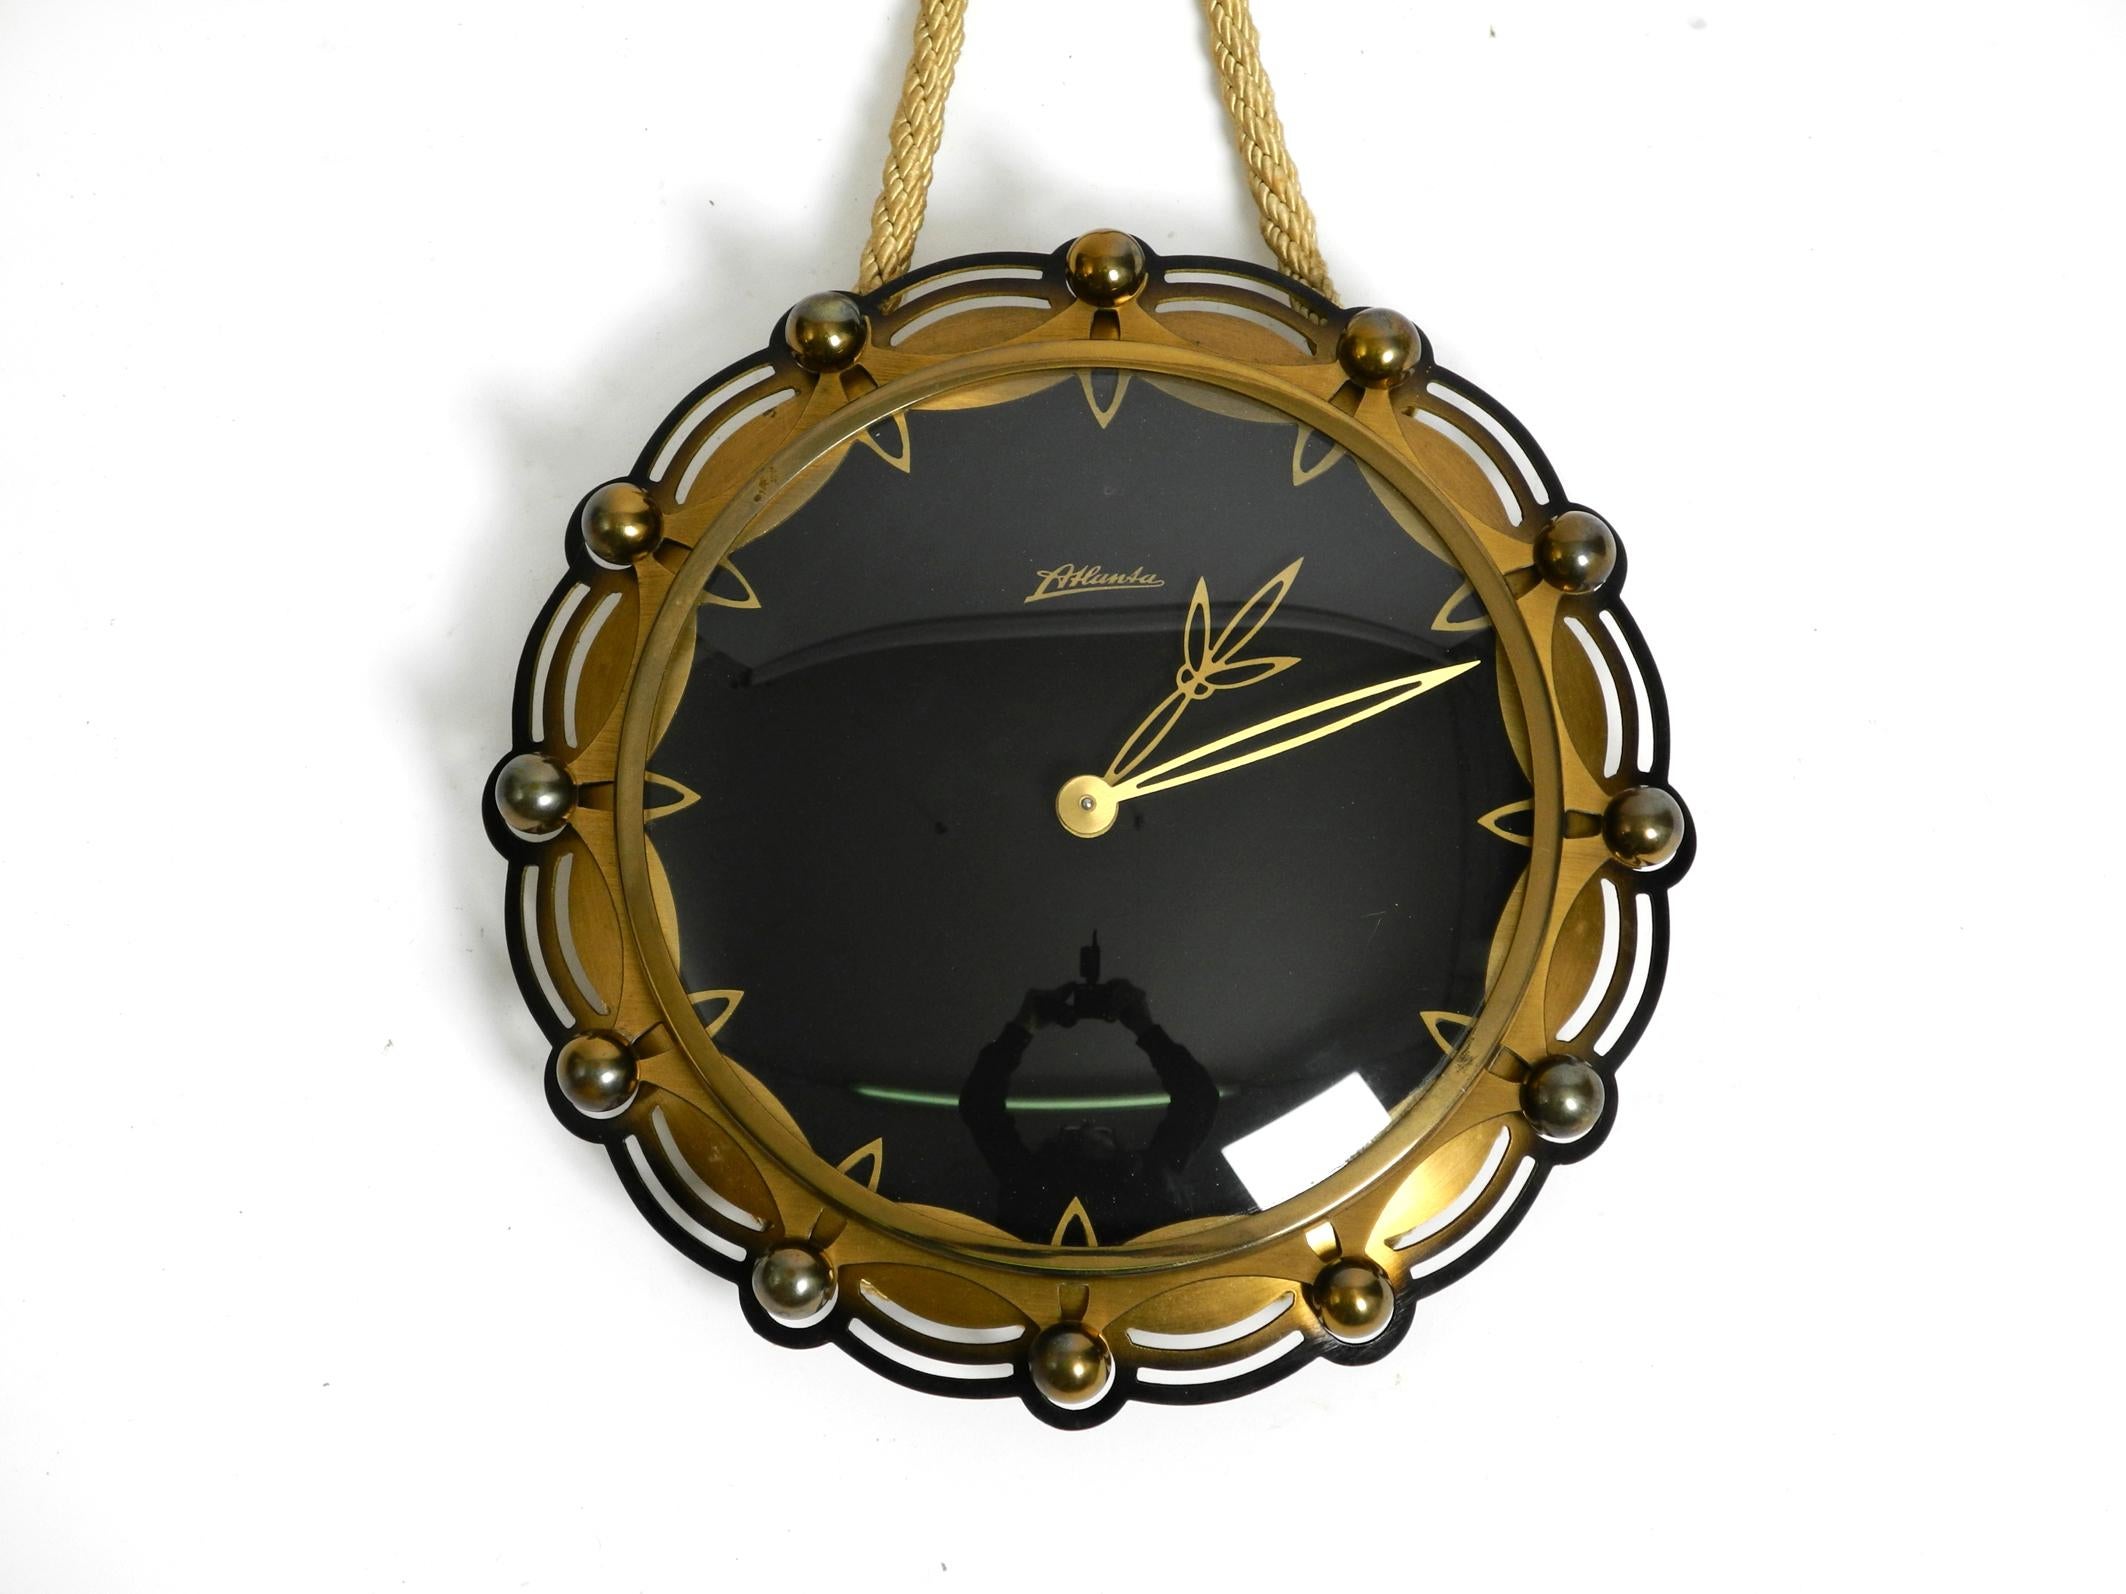 1950s mechanical Atlanta wall clock with a 10 day movement and a gong strike For Sale 9